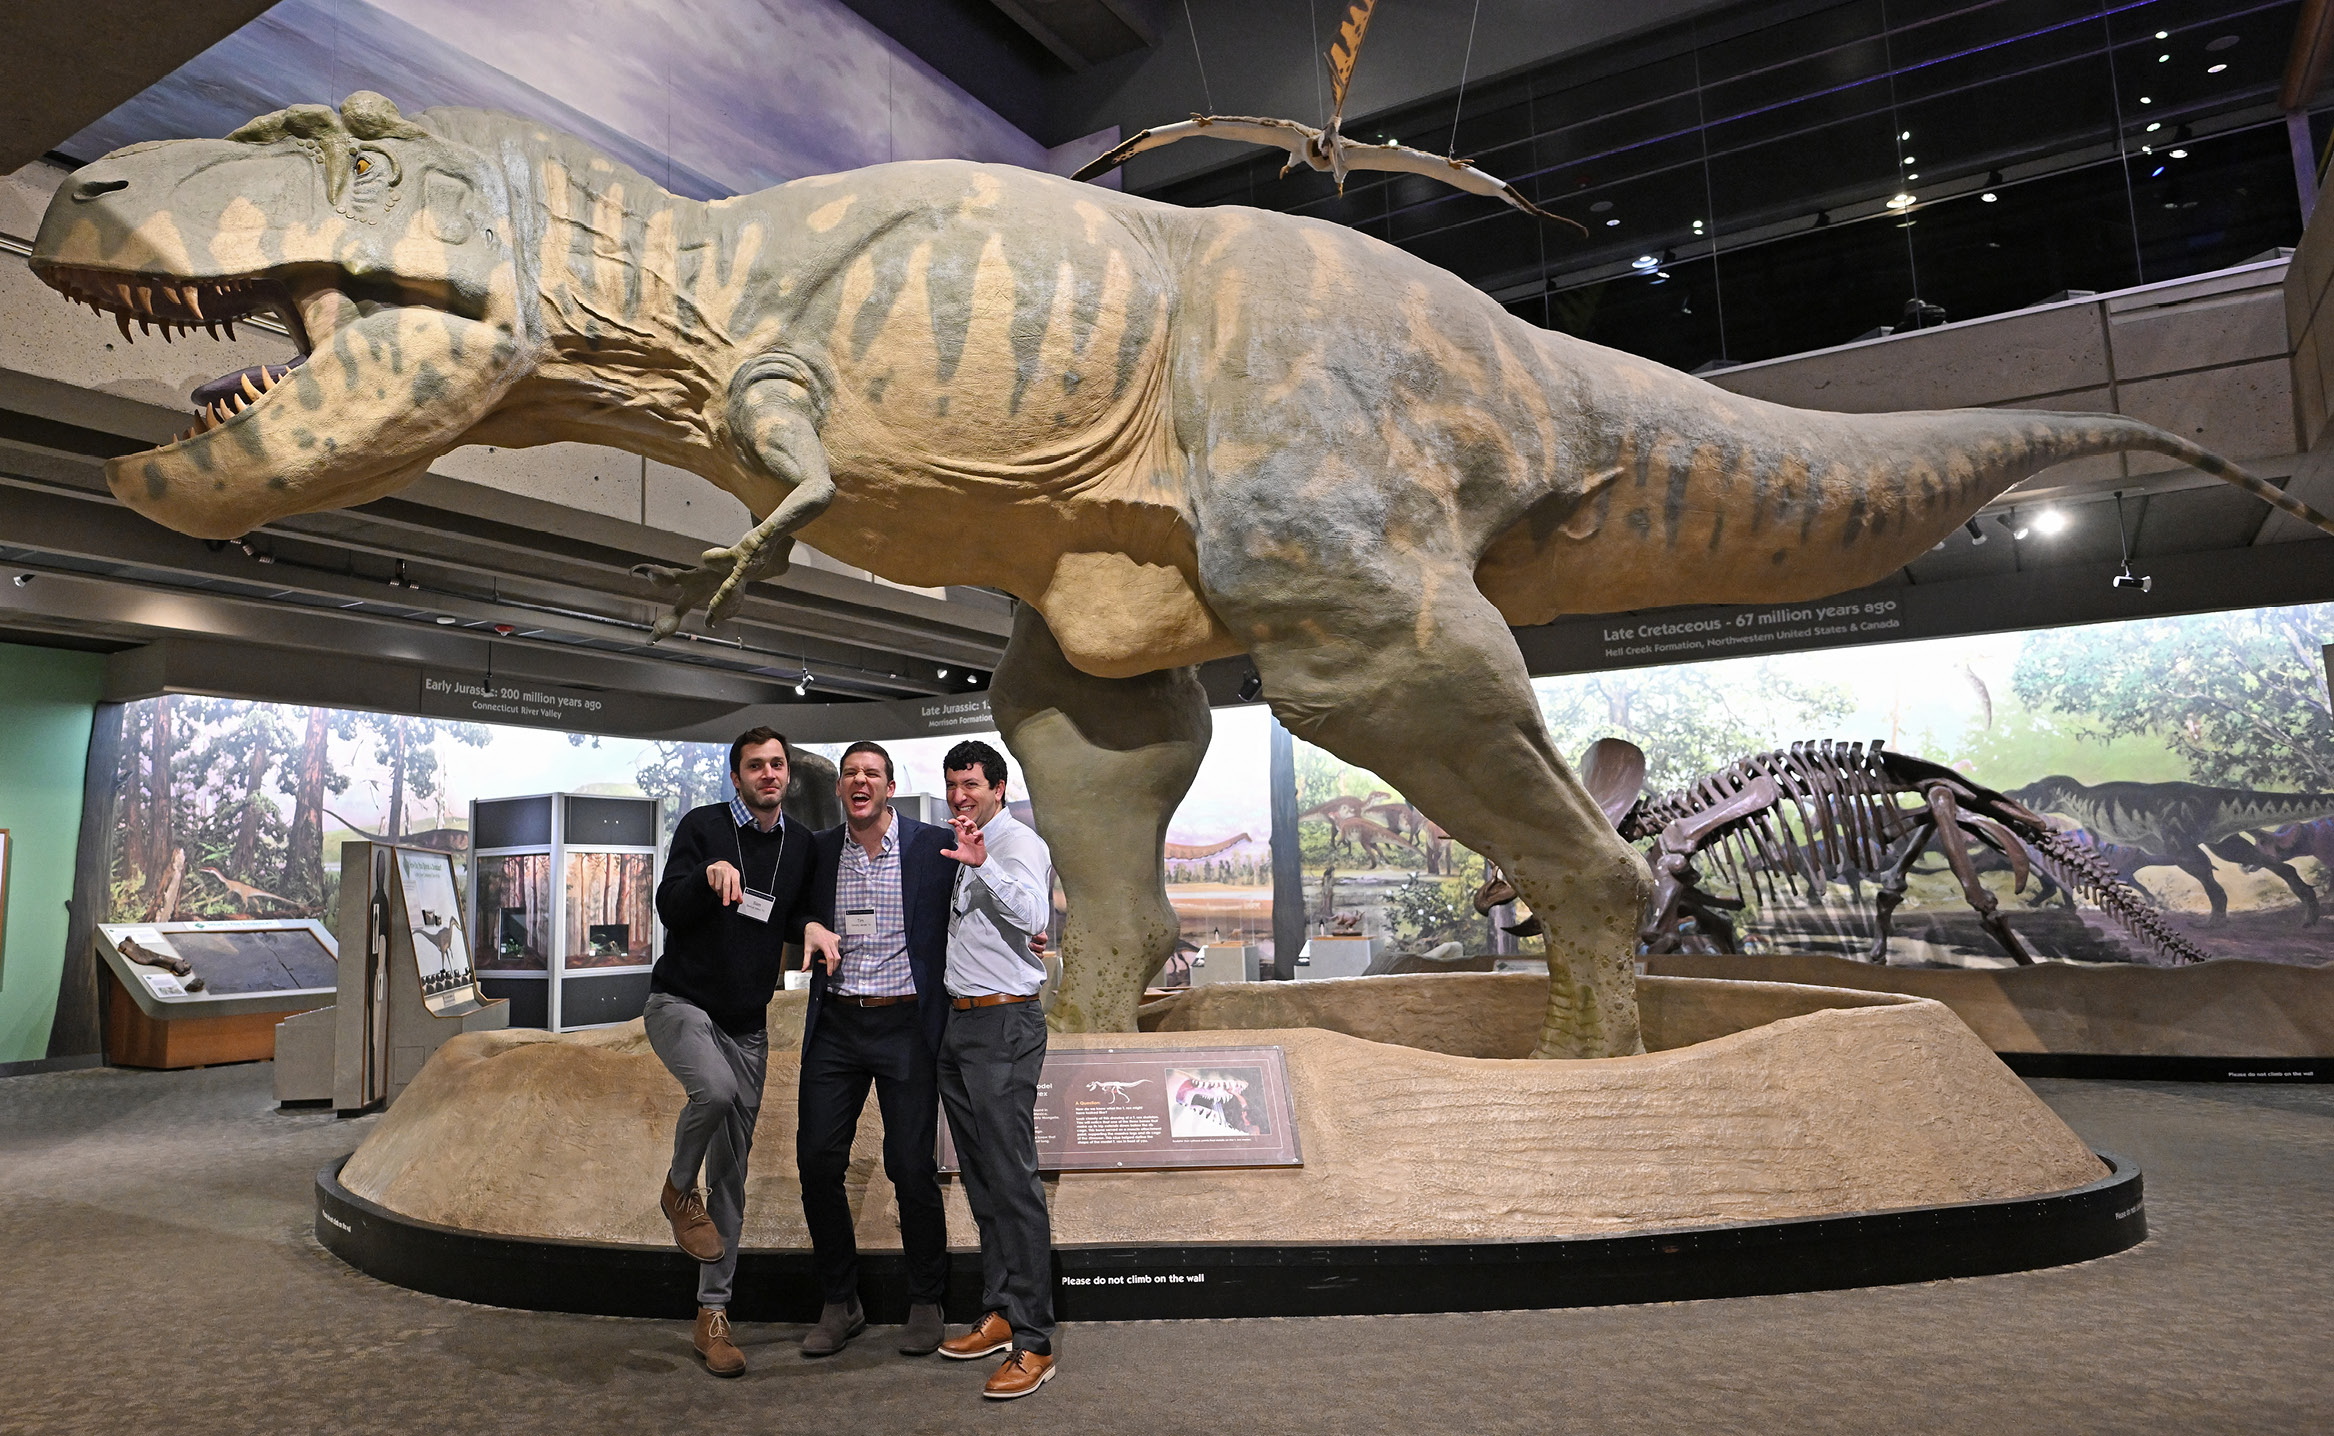 Alums pose in front of a giant dinosaur at an alumni holiday party at the Boston Museum of Science.